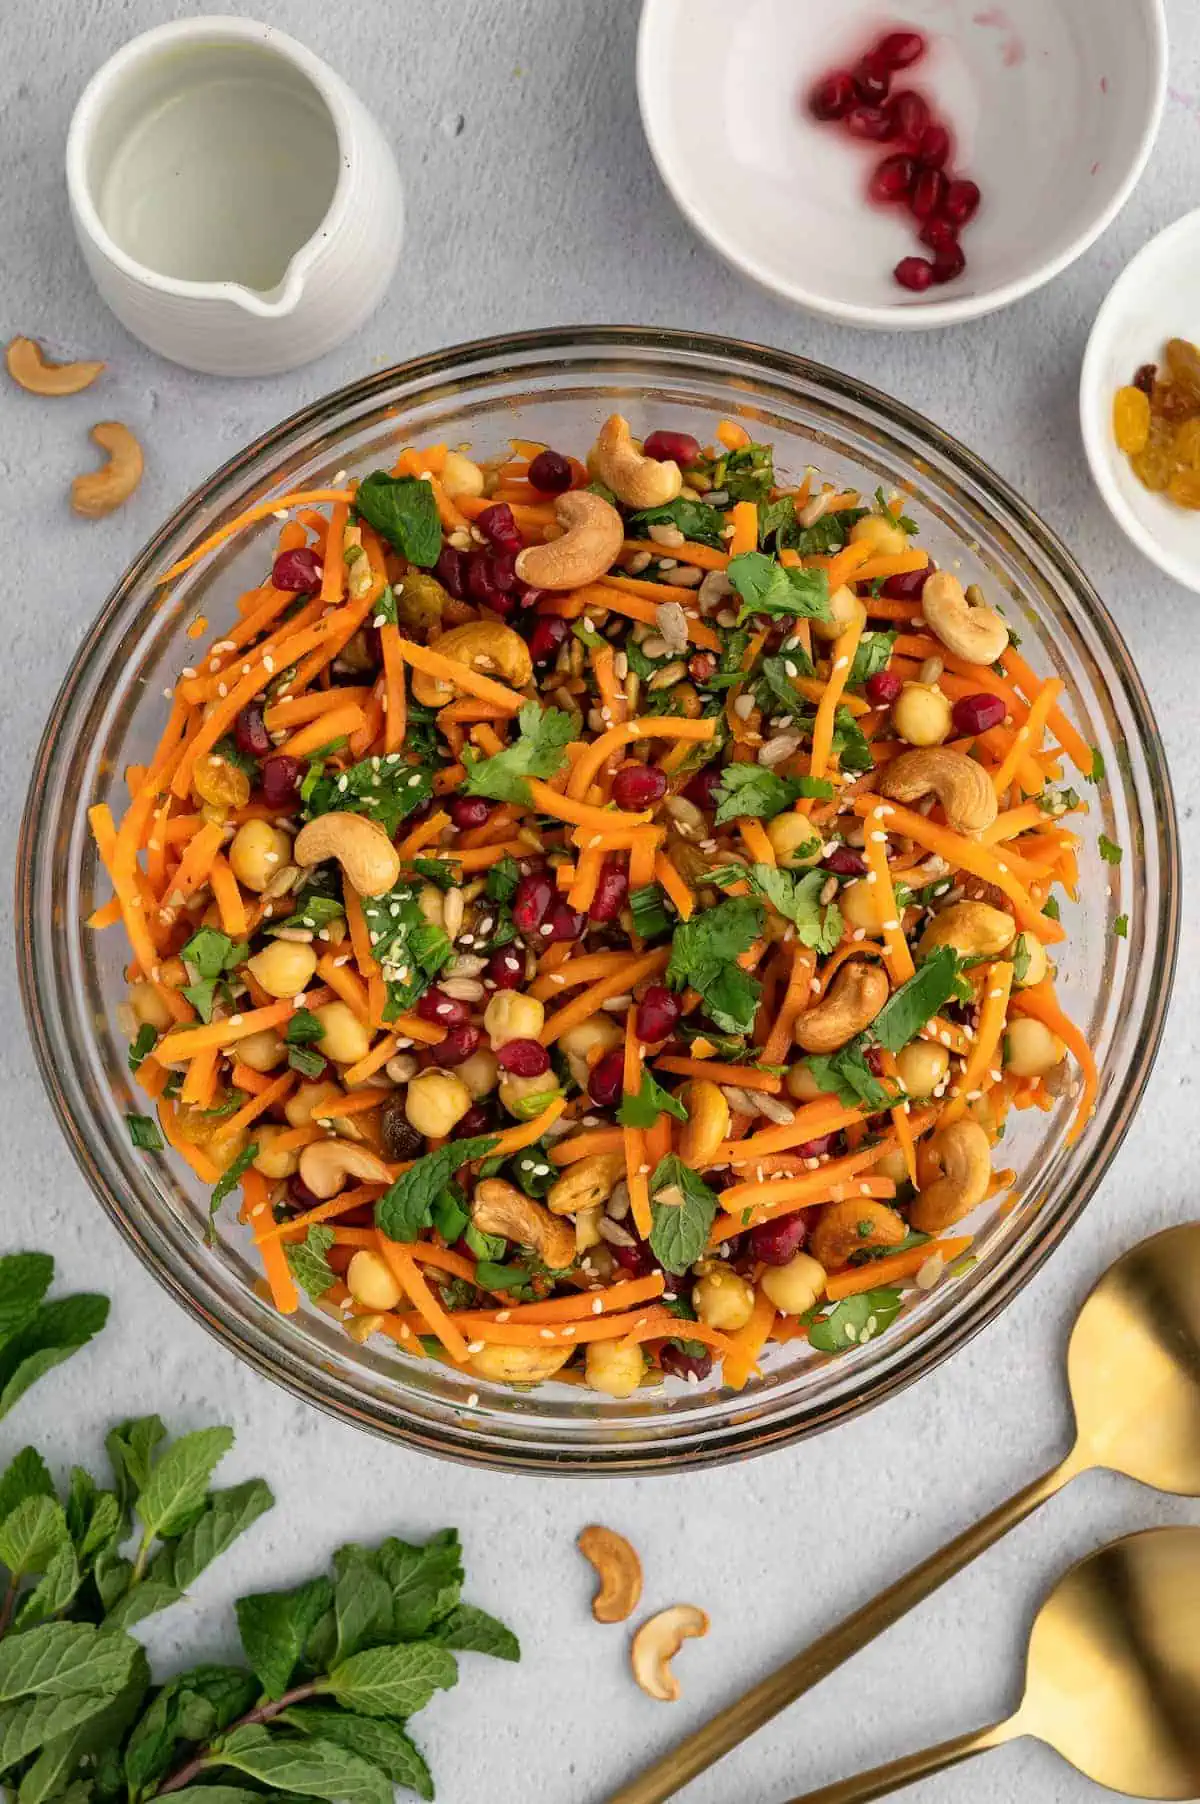 A bowl of Moroccan carrot salad prepped and tossed.